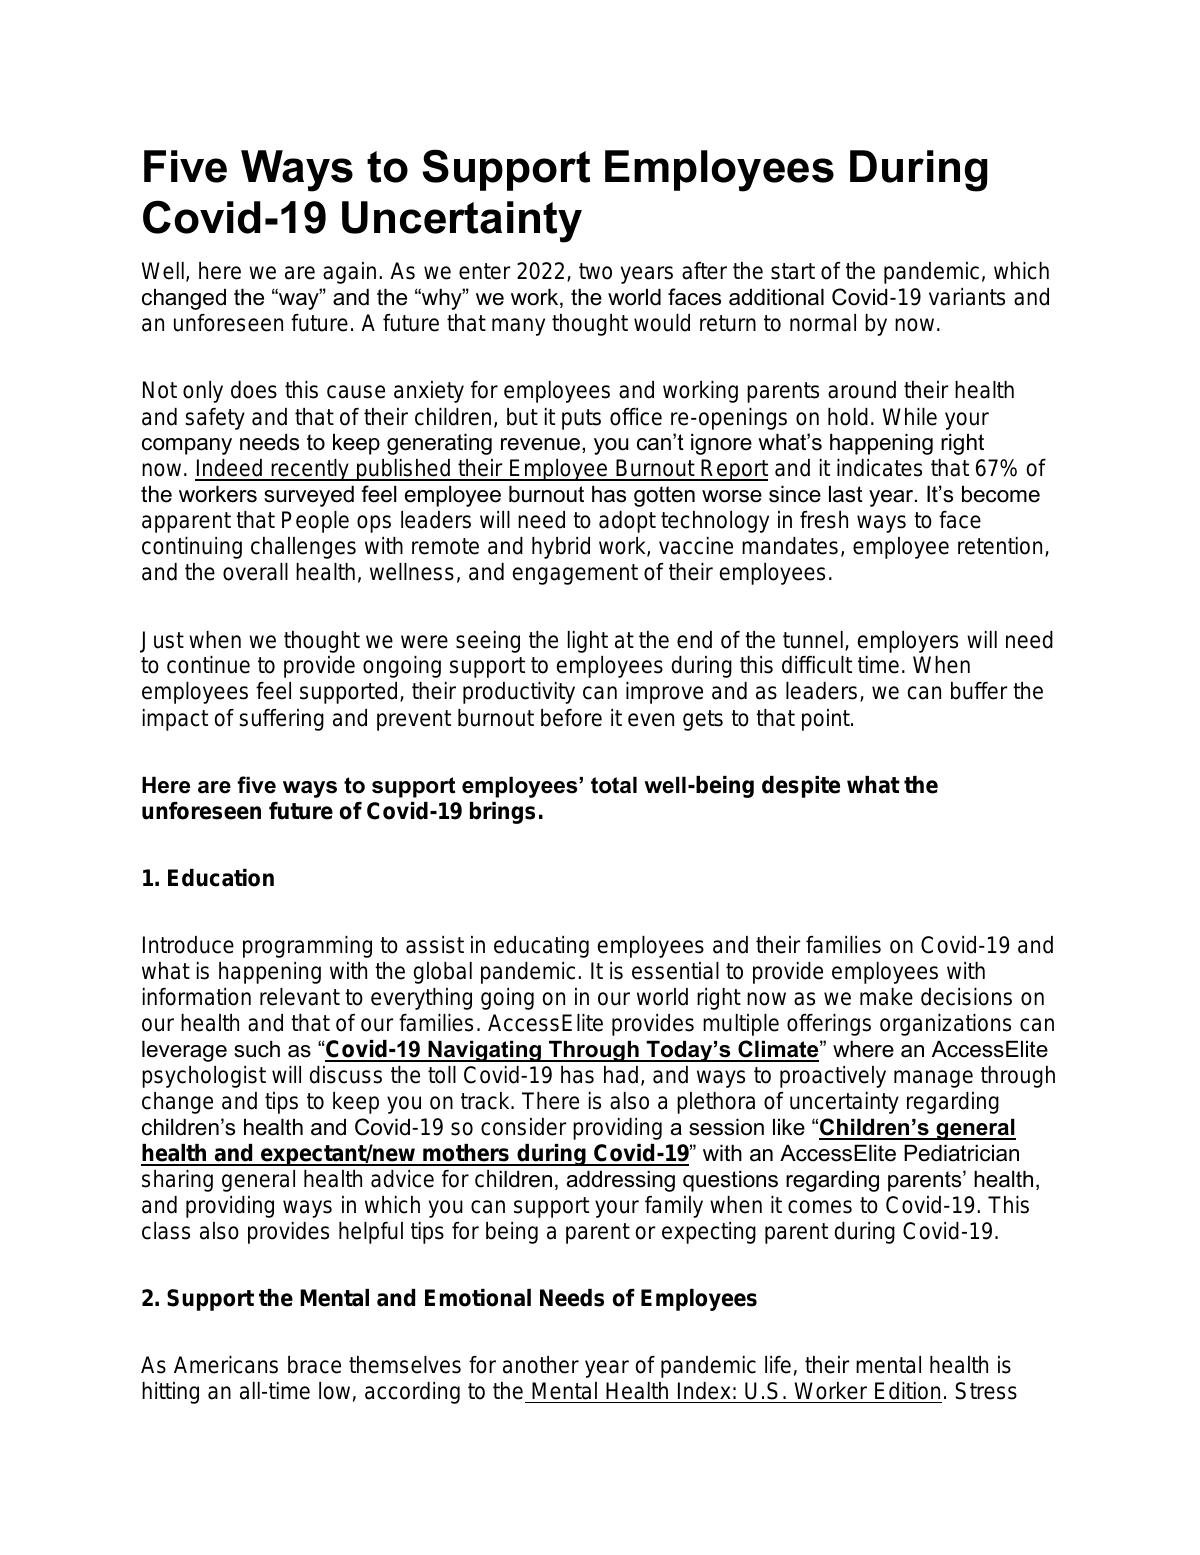 Five Ways to Support Employees During Covid-19 Uncertainty